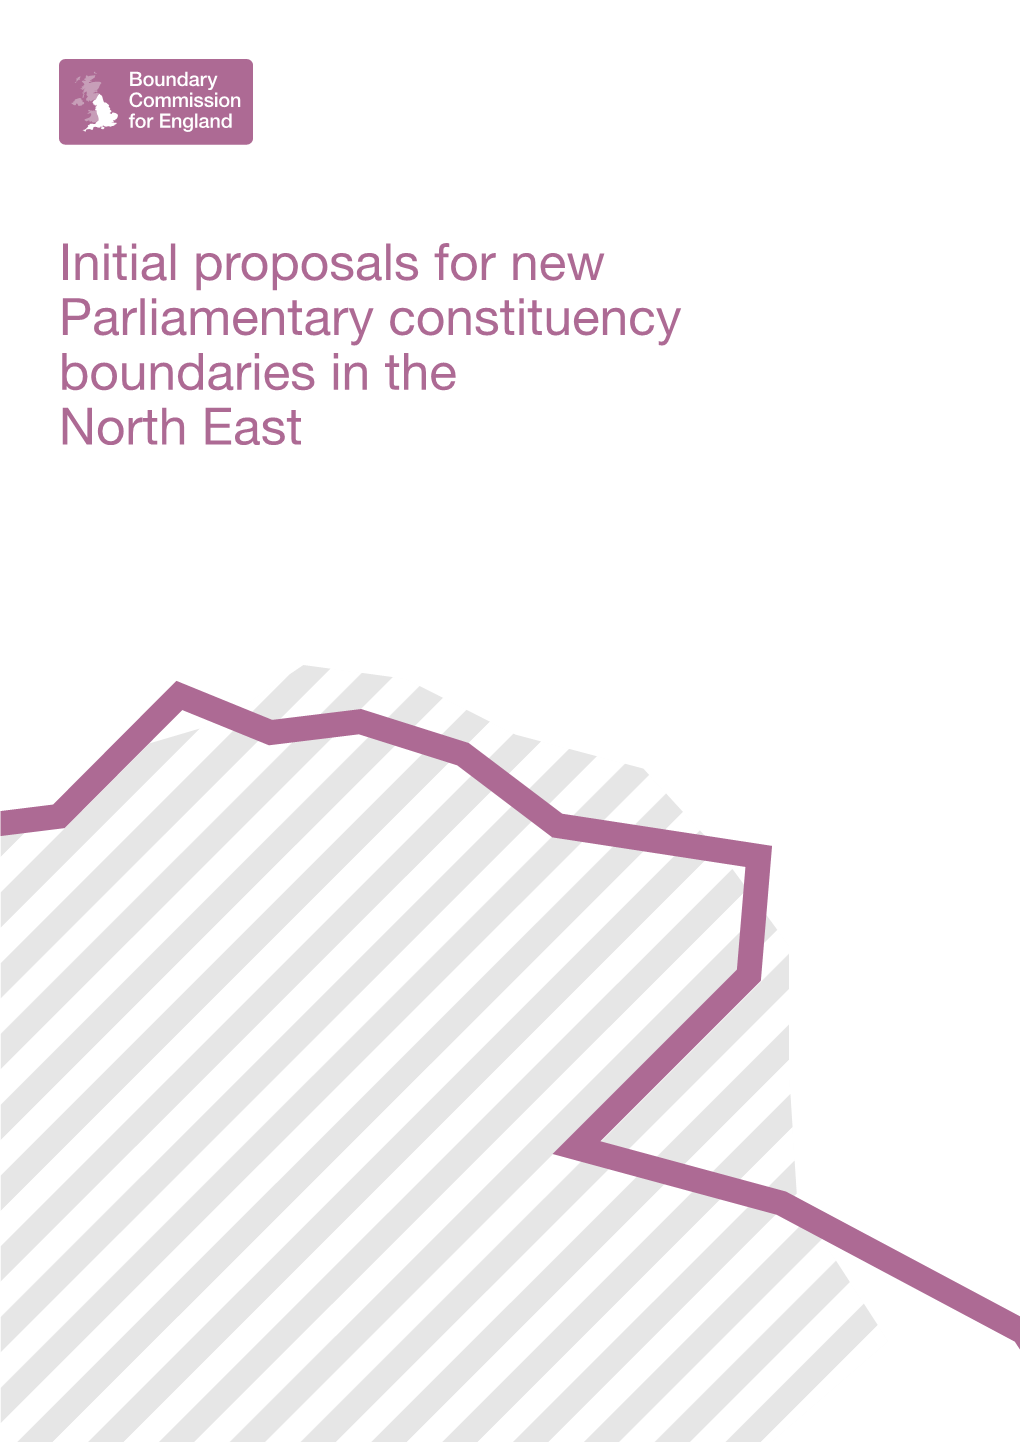 Initial Proposals for New Parliamentary Constituency Boundaries in the North East Region